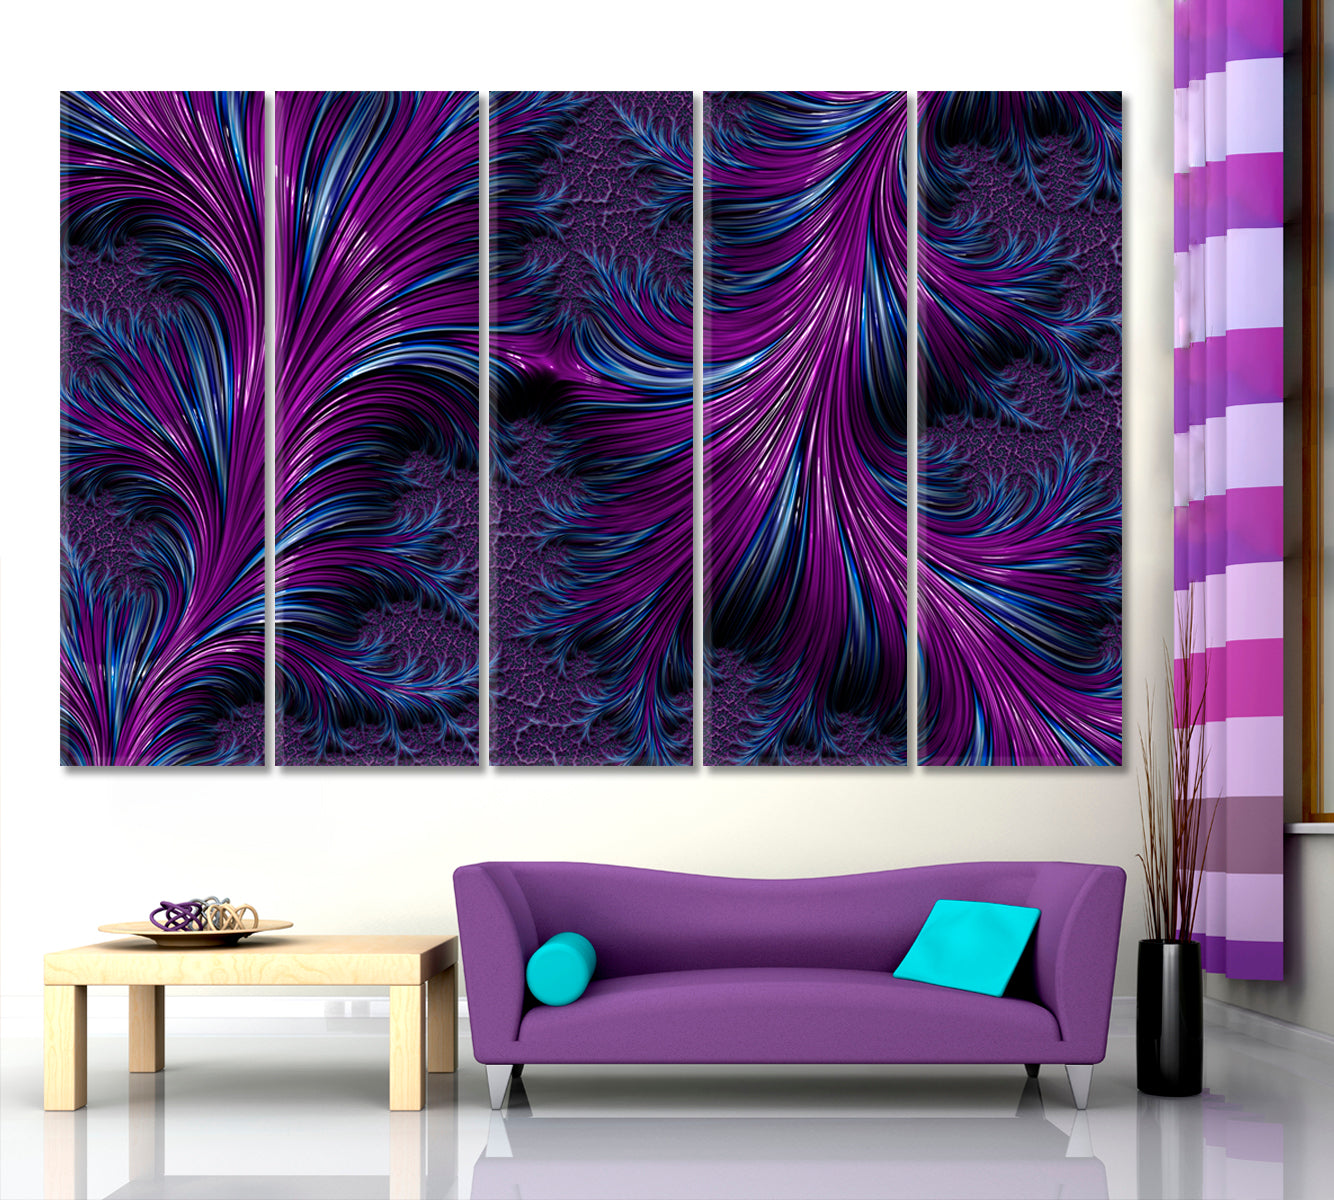 Abstract Fractal Spiral Swirls Purple and Navy Blue Feathers Canvas Print Contemporary Art Artesty 5 panels 36" x 24" 